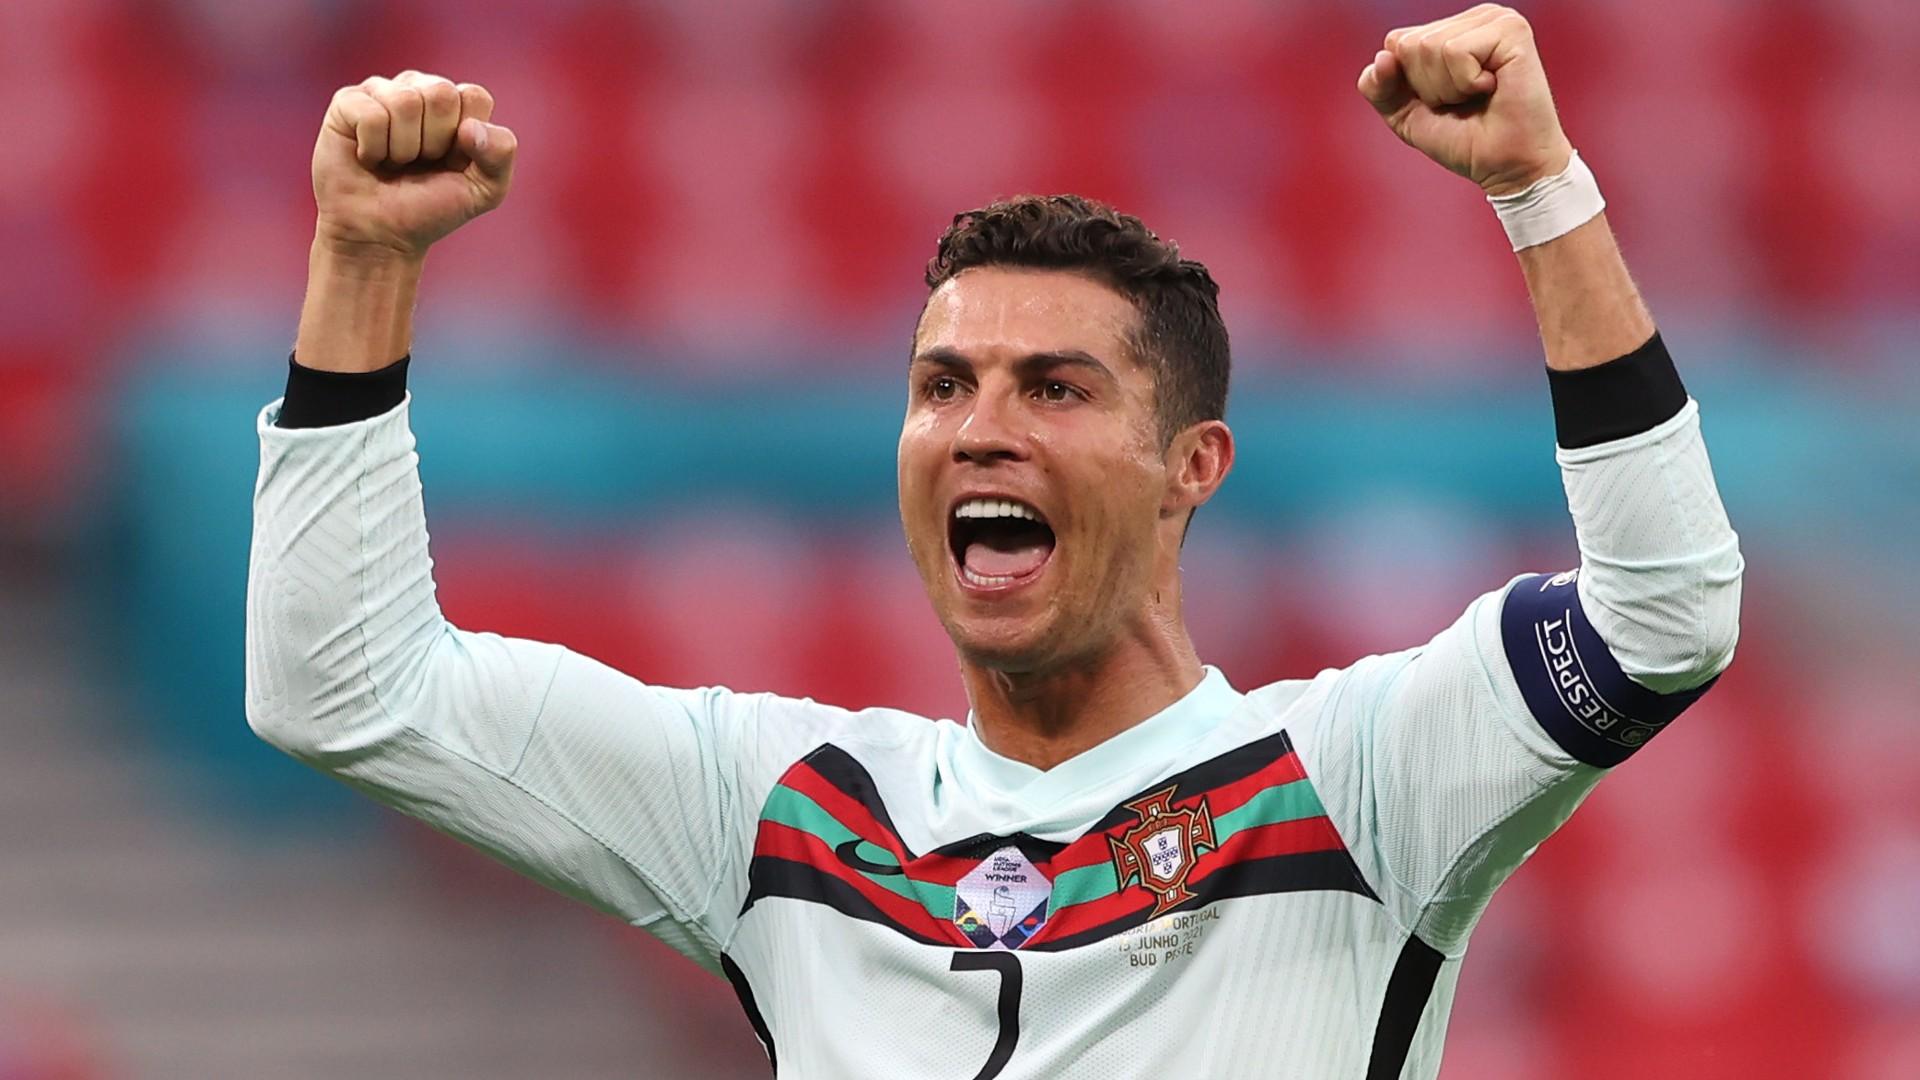 Cristiano Ronaldo's 2022 World Cup path: Portugal to face Turkey, and possibly Italy